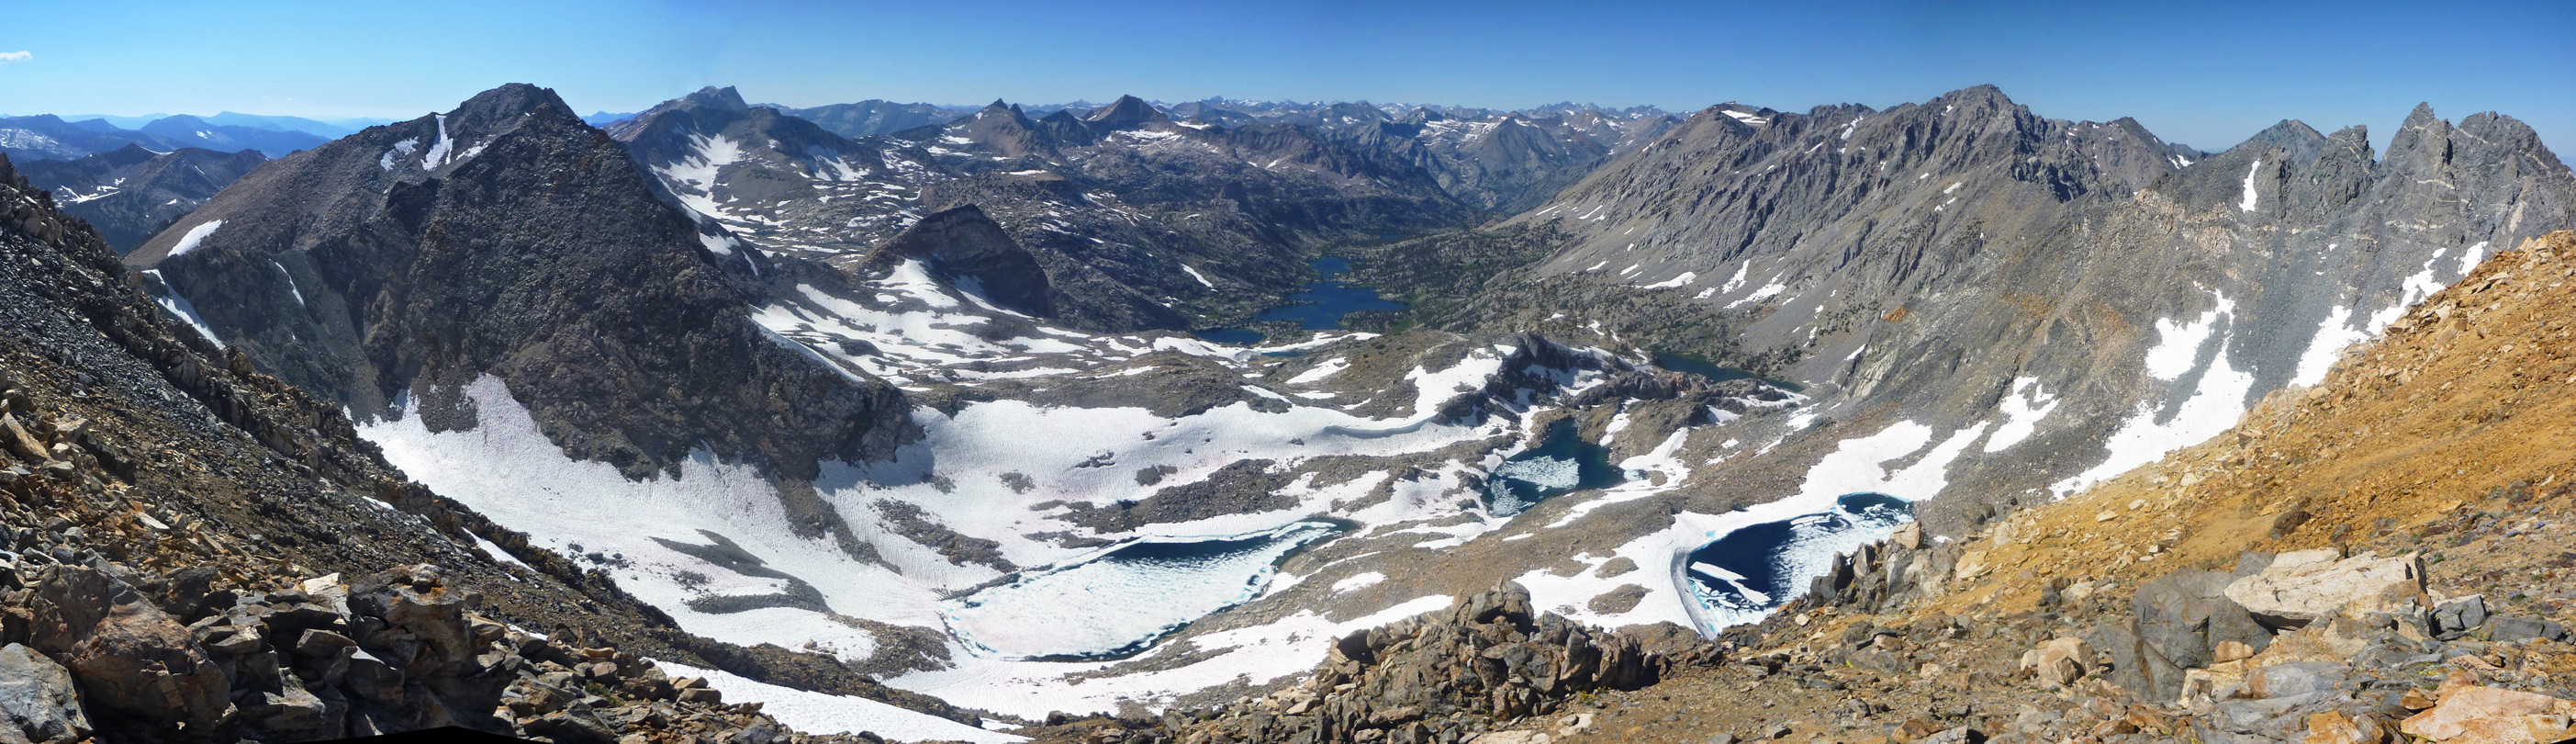 Panorama from Mount Gould